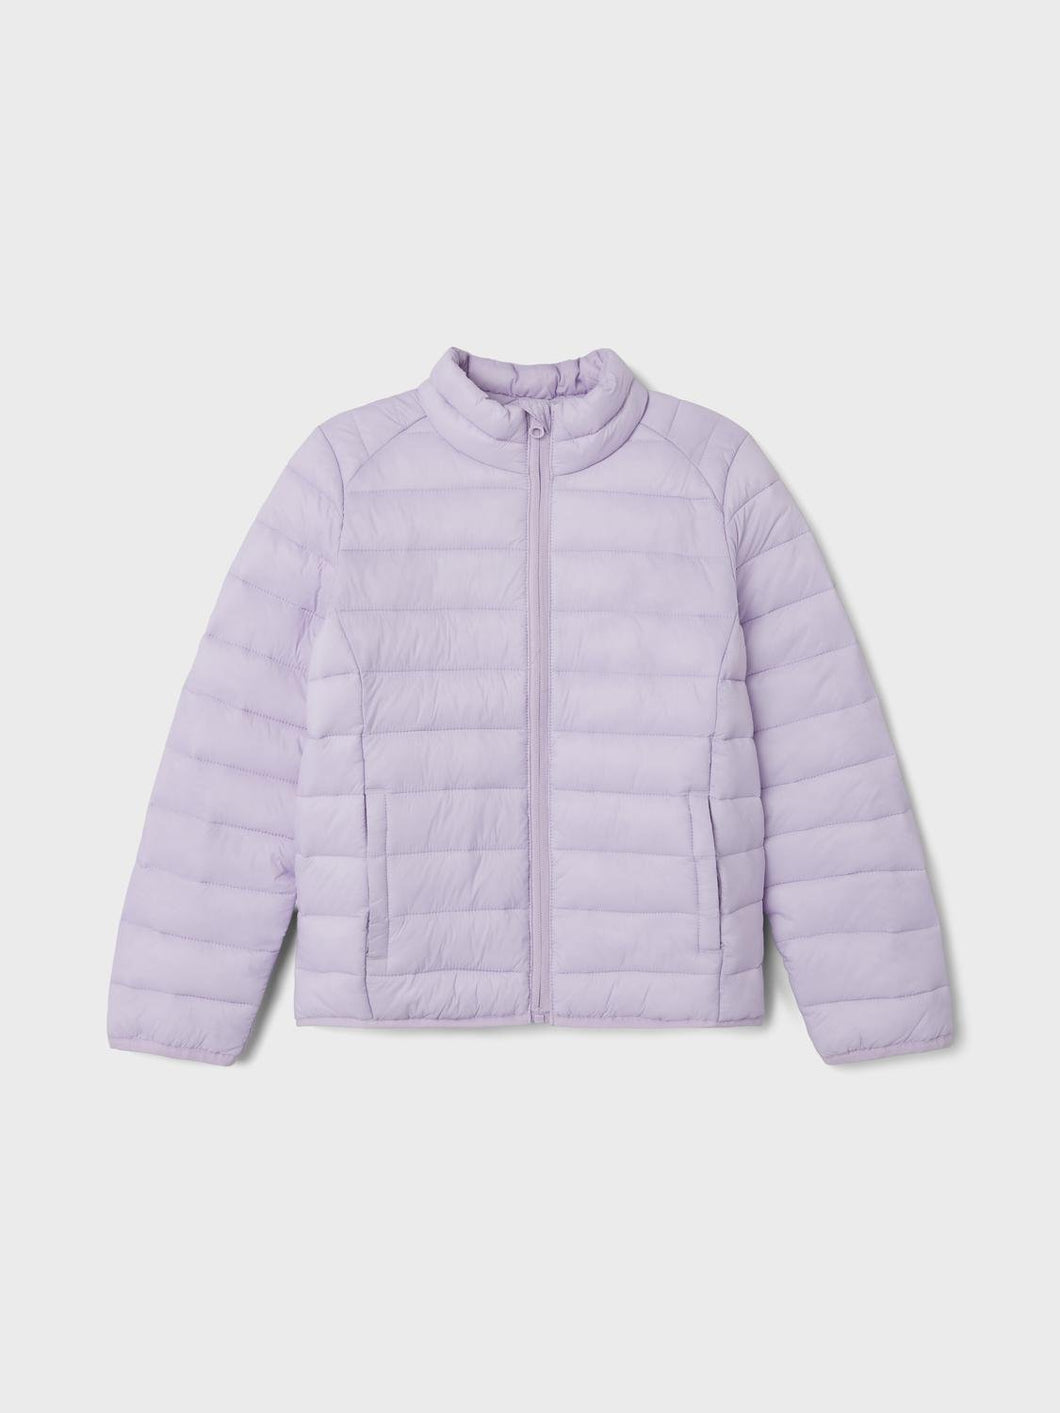 NKNMEMORY Outerwear - Orchid Bloom